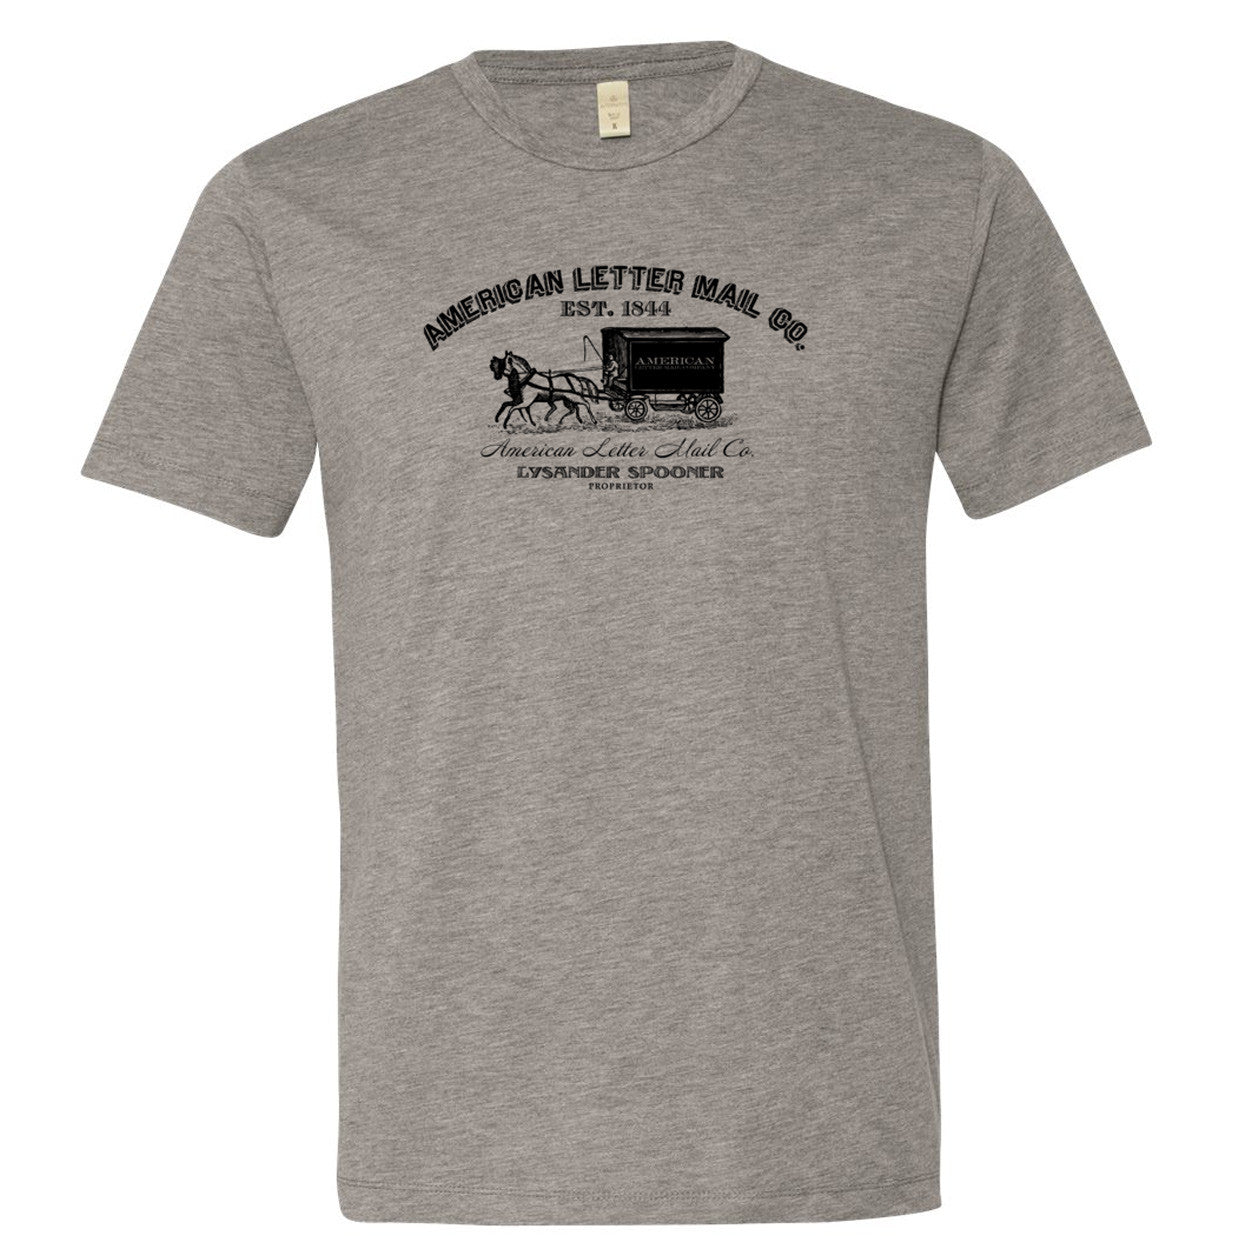 The American Letter Mail Company Vintage T-Shirt